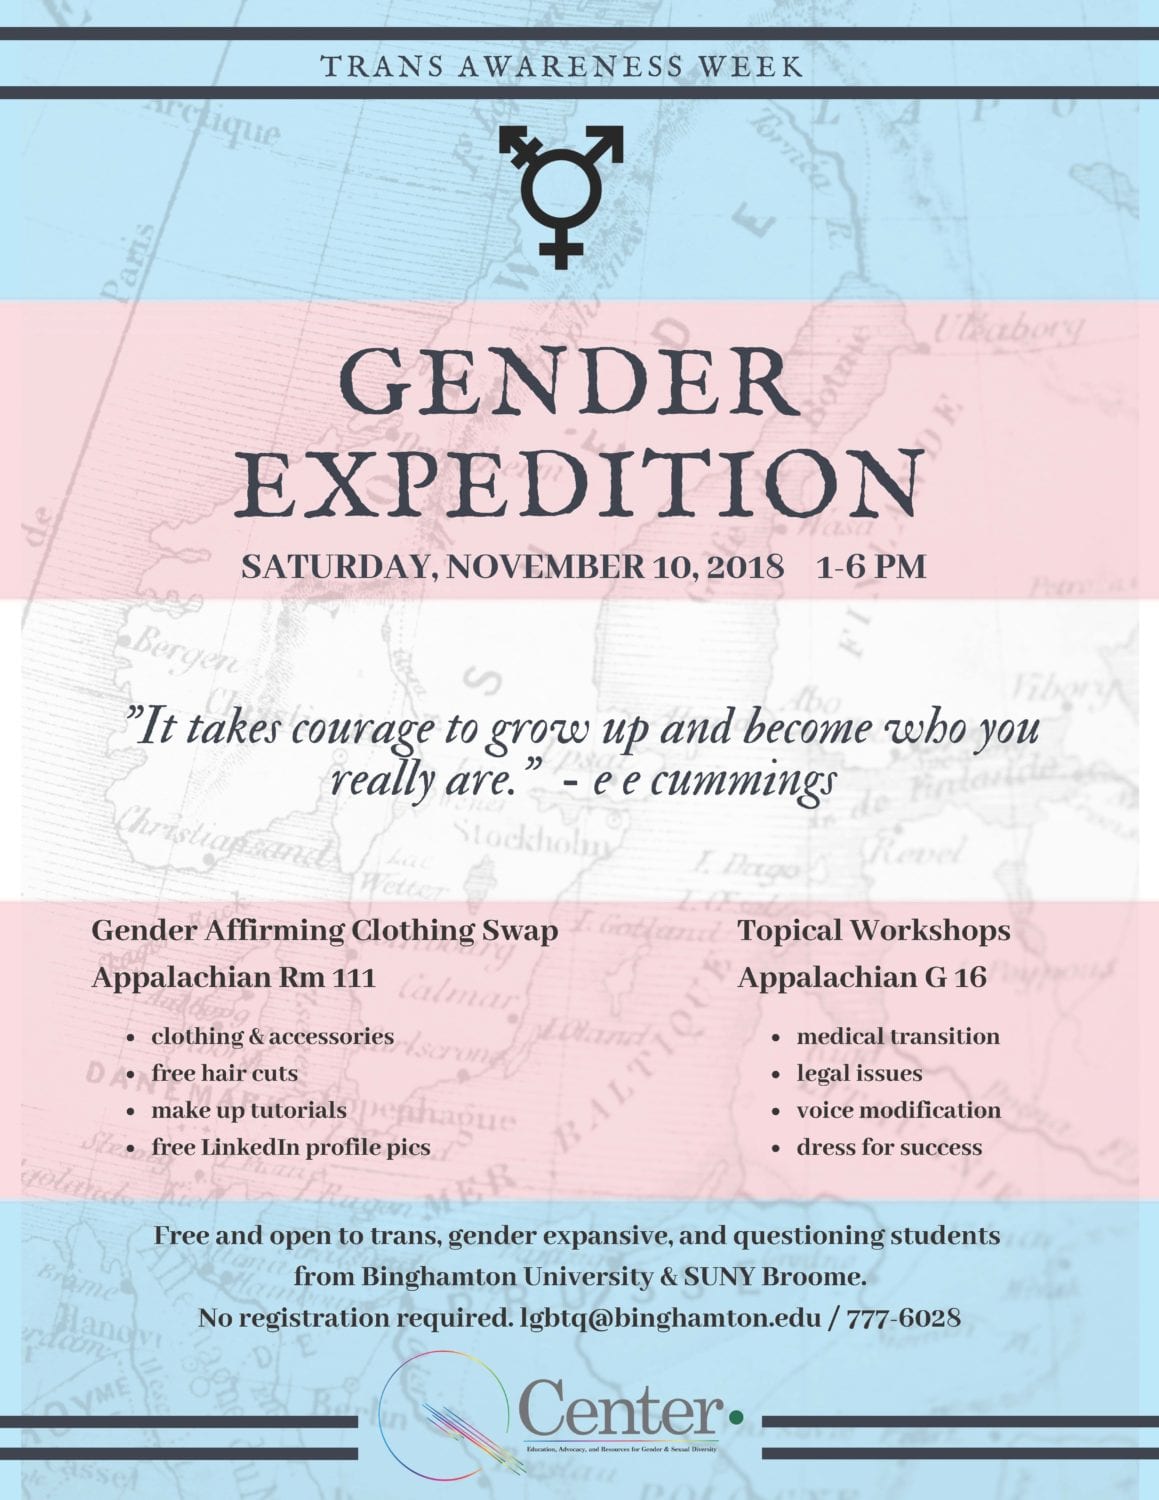 In the Community: Gender Expedition on Nov. 10